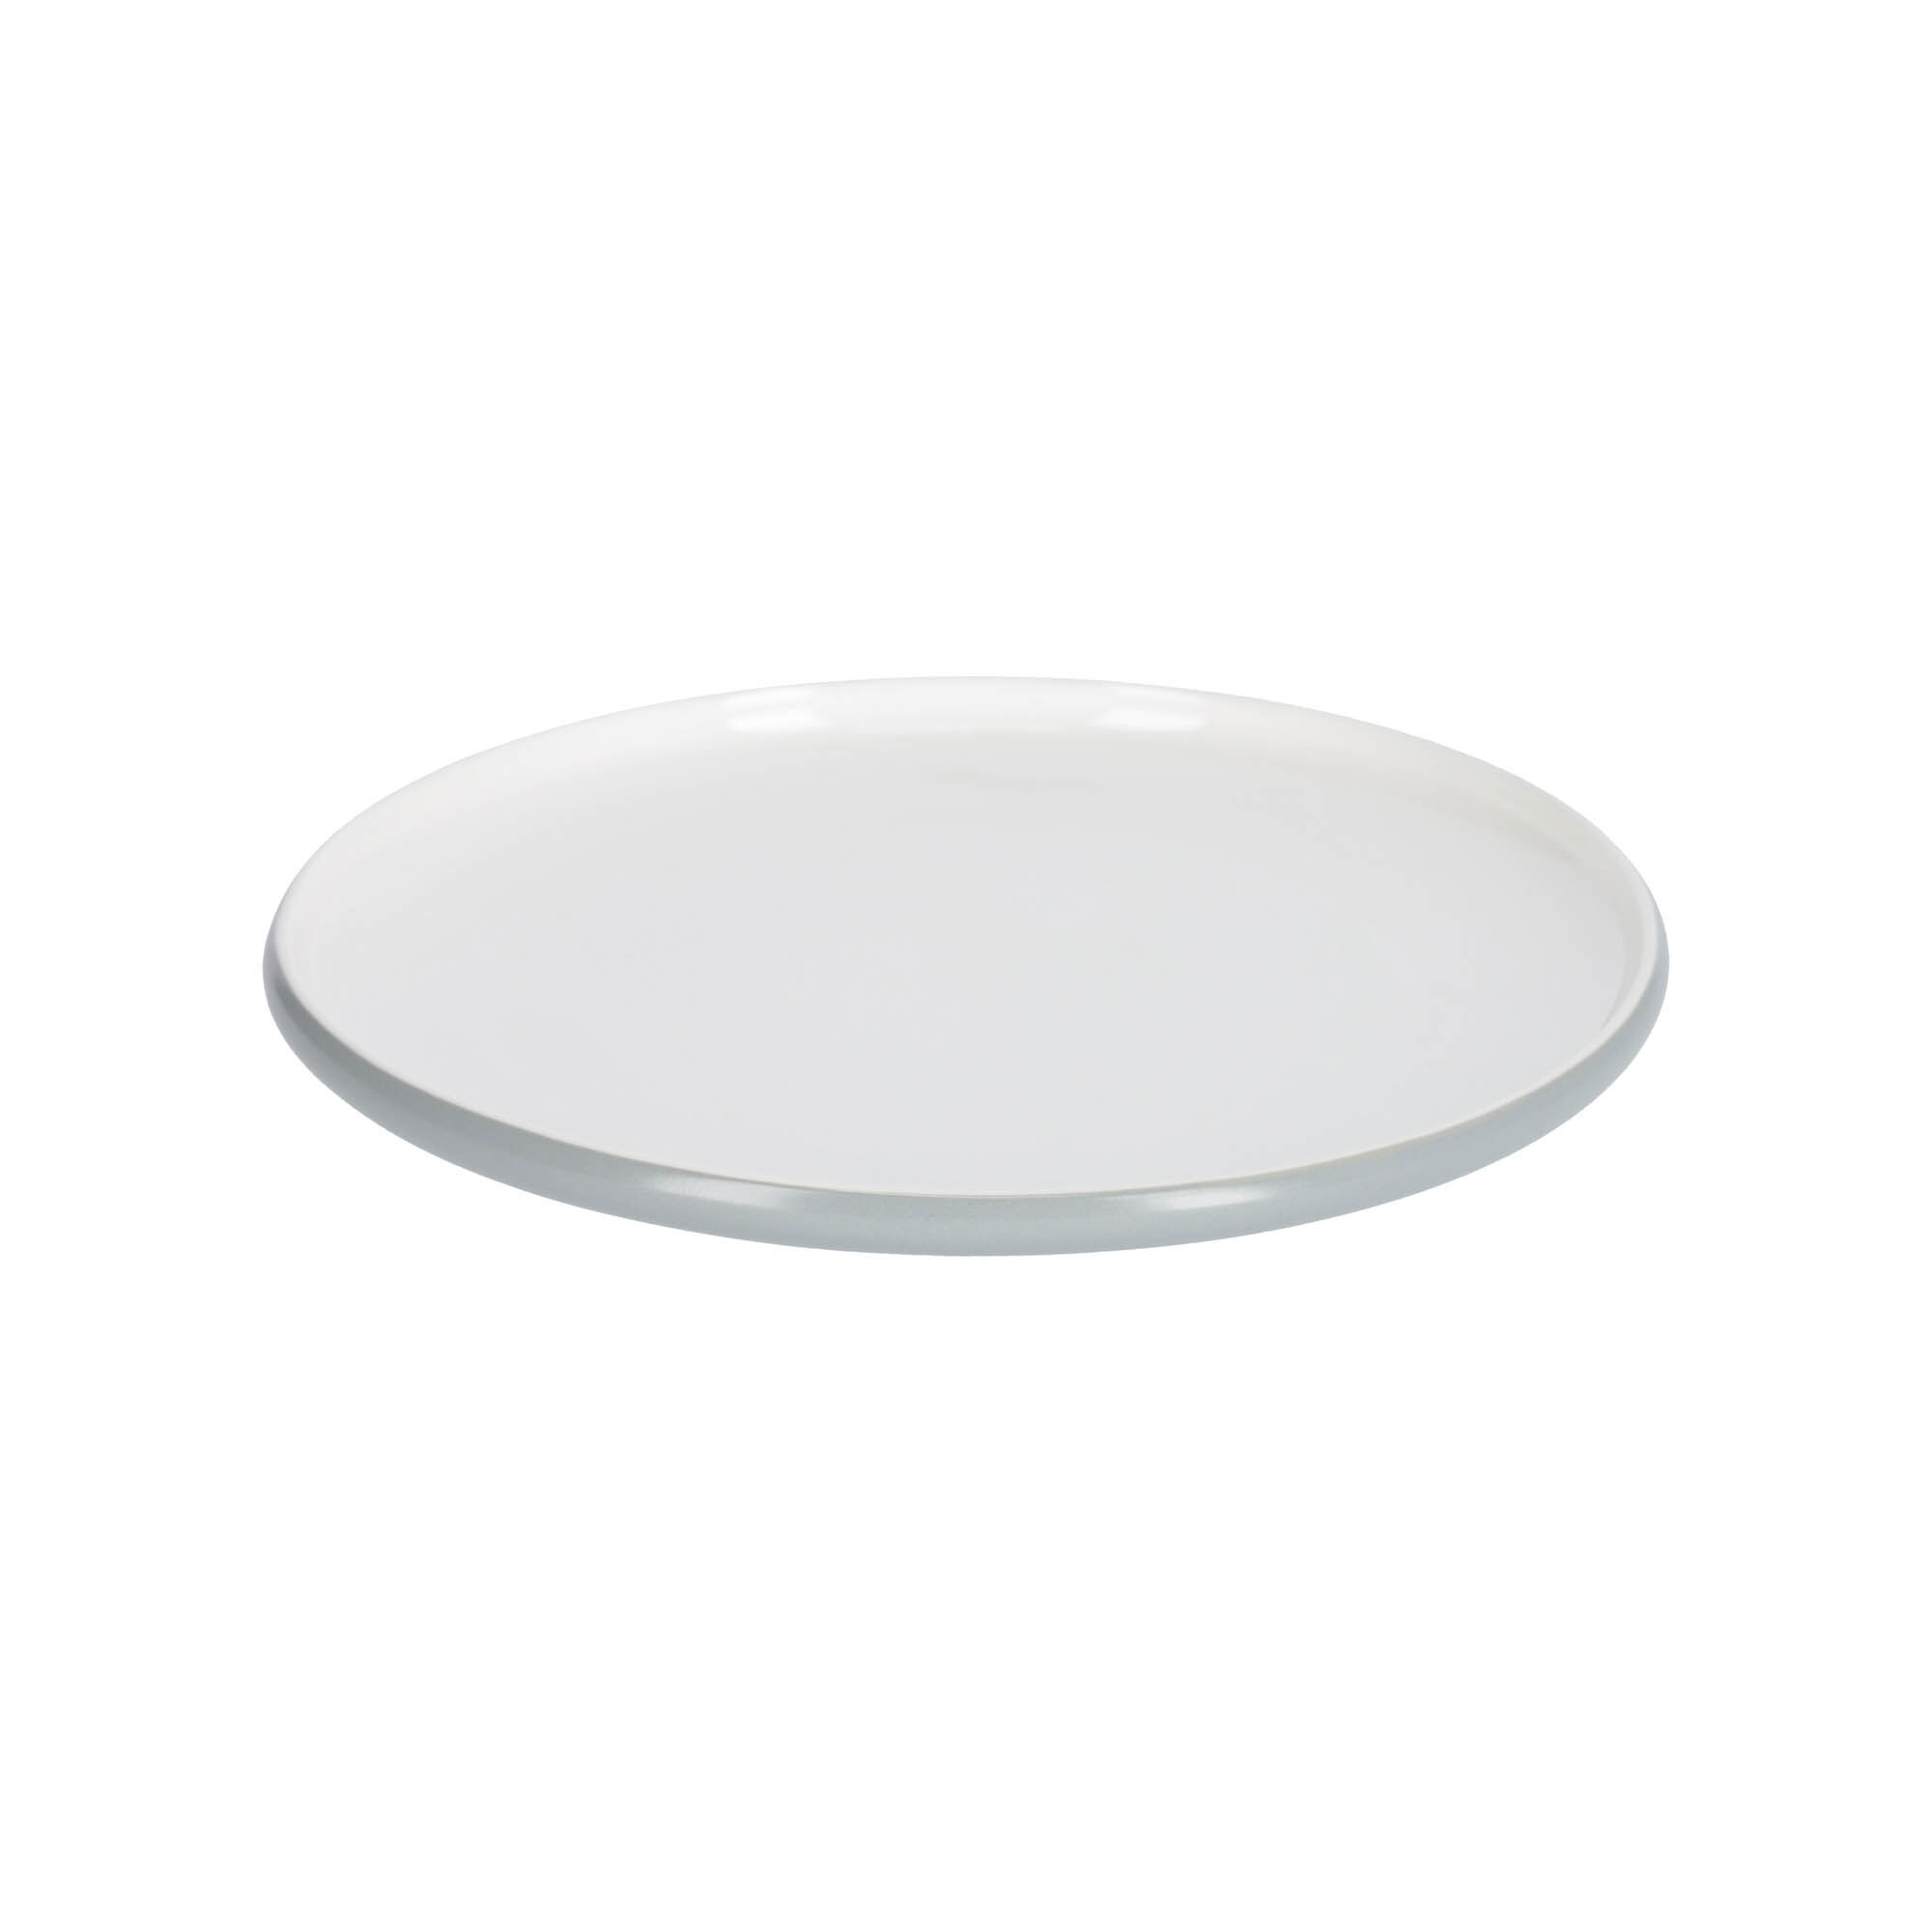 Kave Home Sadashi flat porcelain plate in grey and white